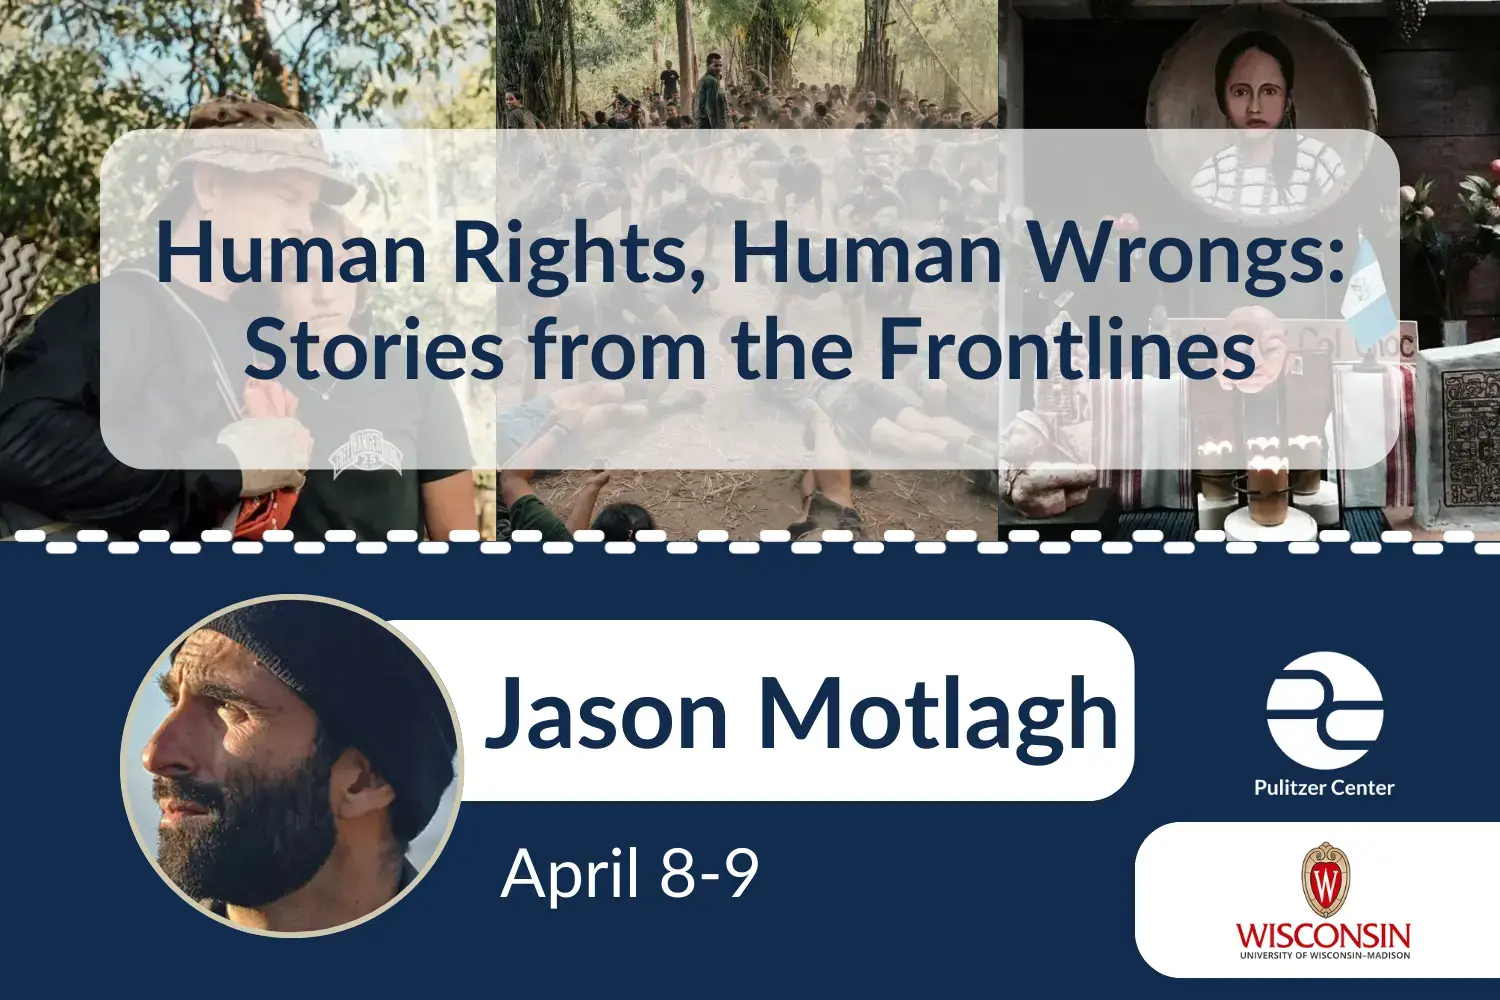 Human Rights, Human Wrongs: Stories from the Frontlines: Jason Motlagh at University of Wisconsin Madison April 8-9